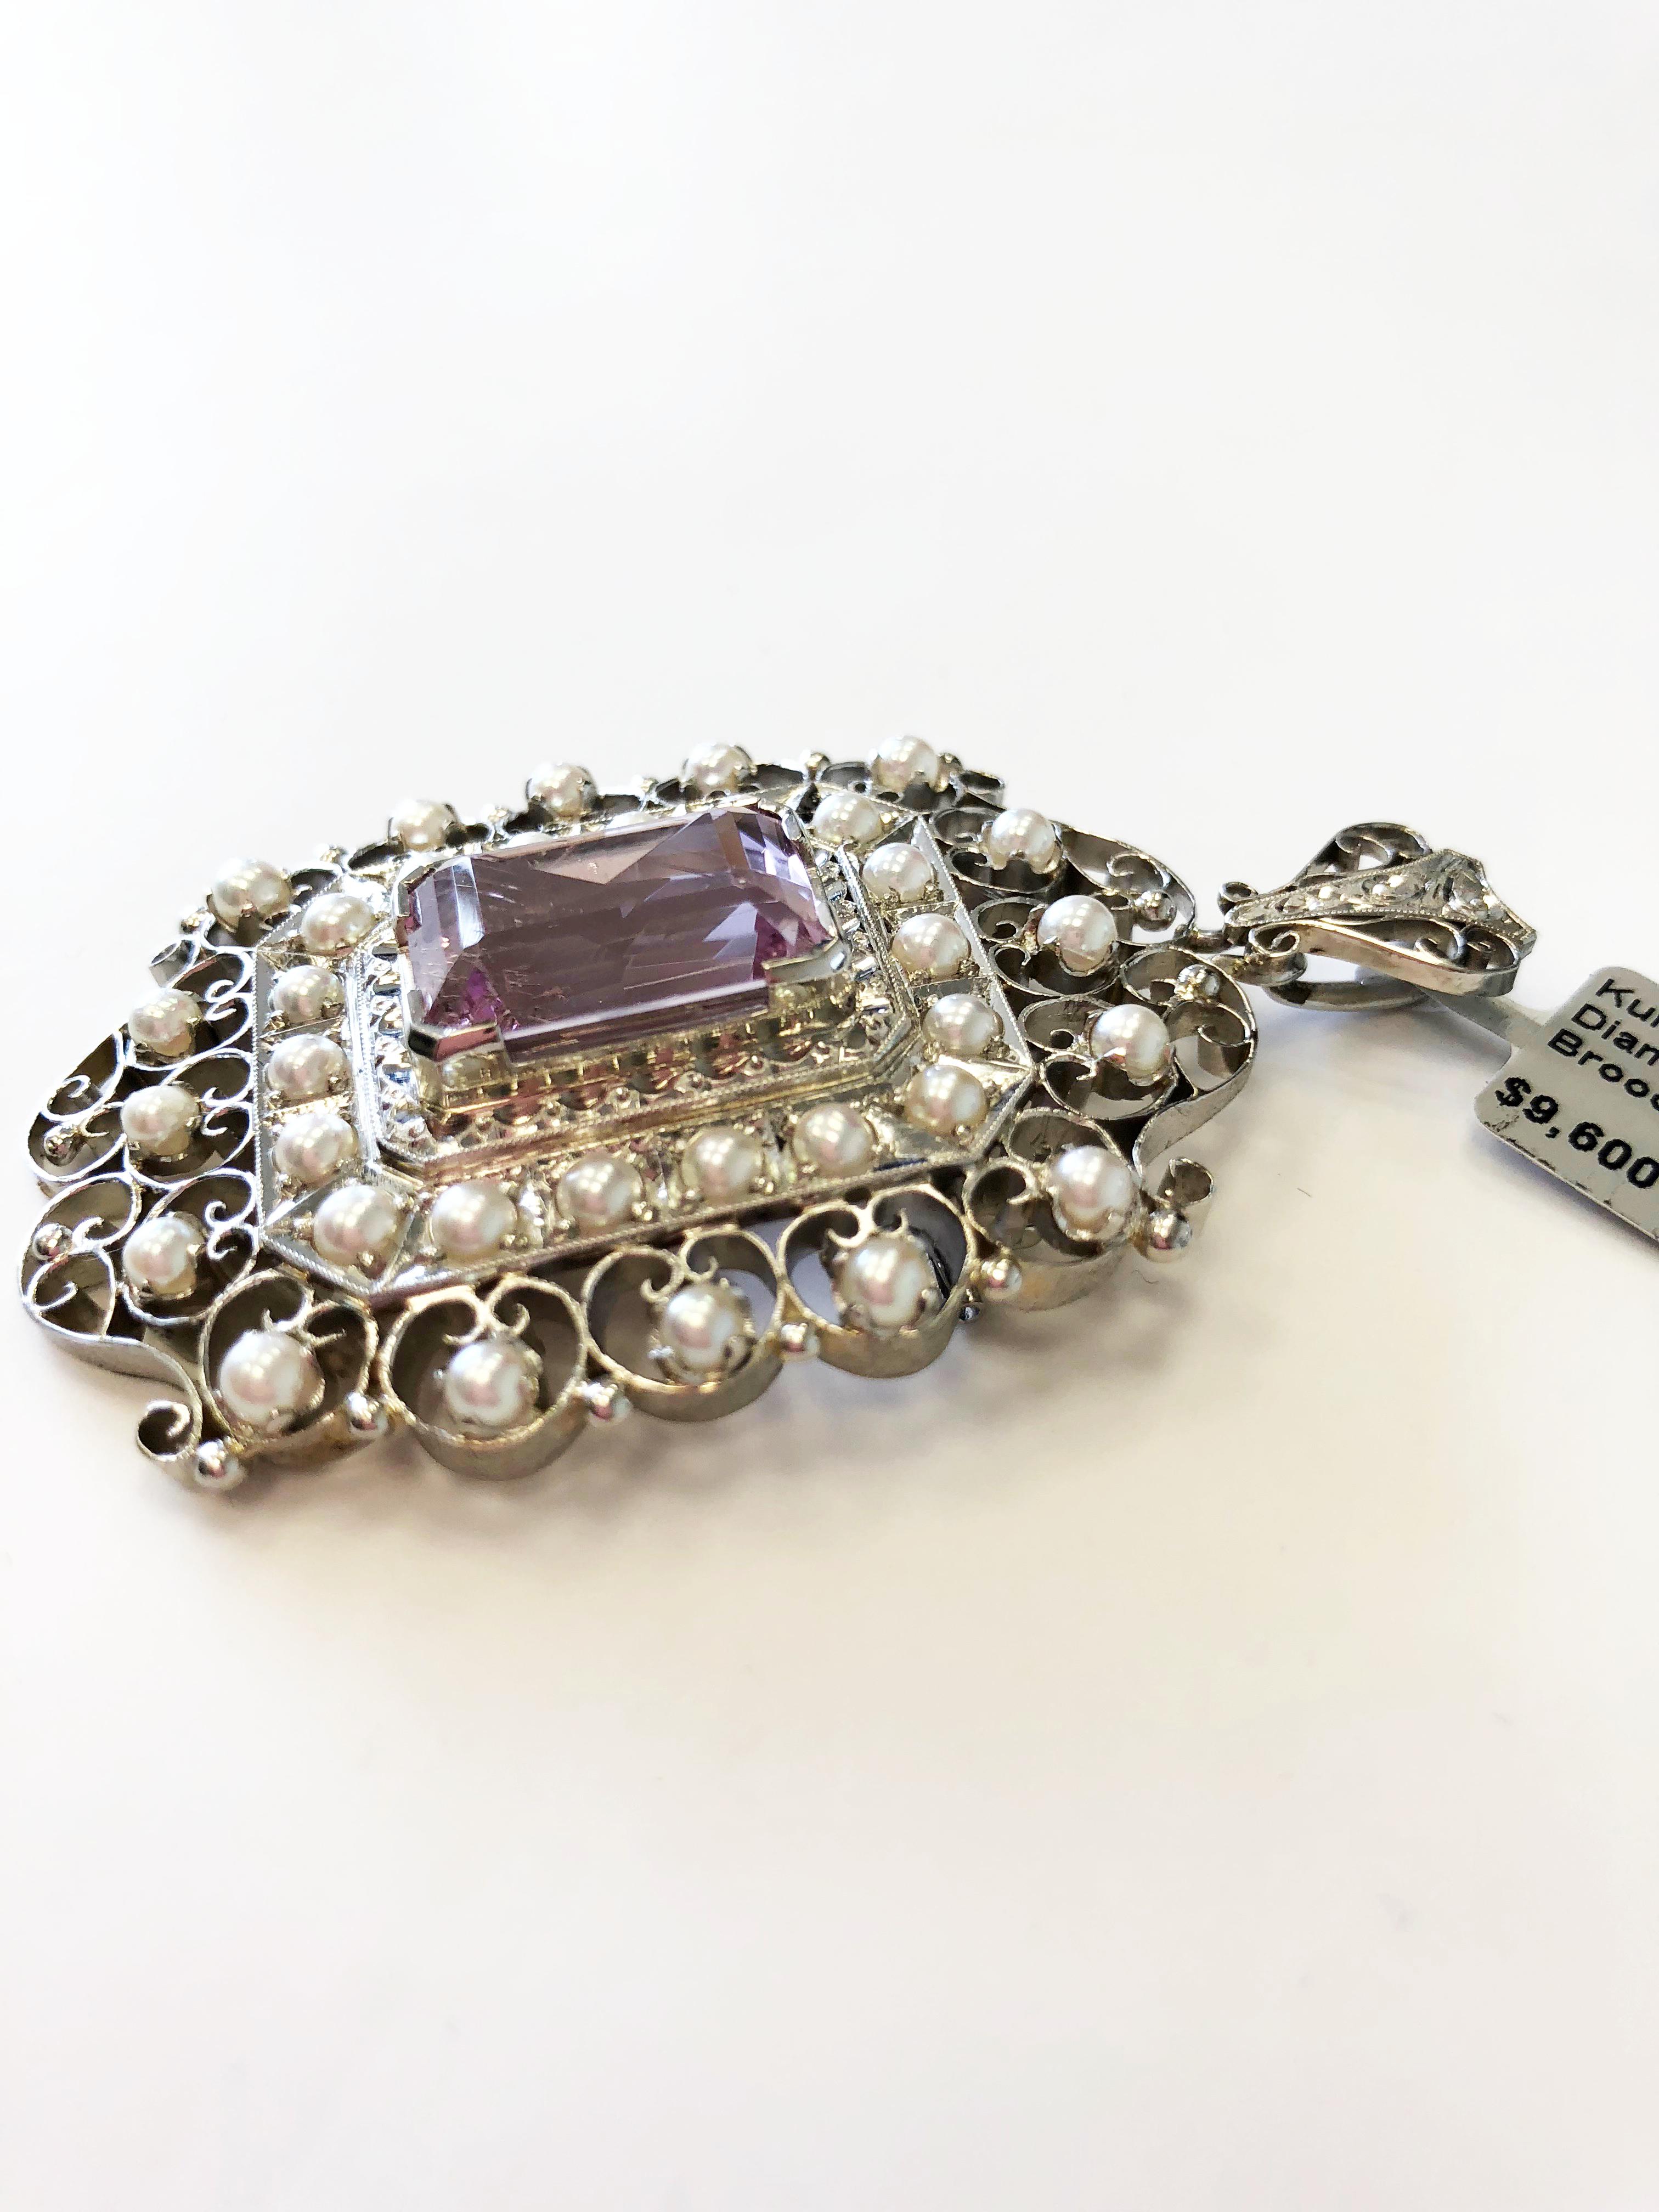 Unique pendant/brooch featuring a beautiful pink emerald cut kunzite, white diamonds, and round pearls. Because of the estate nature of this piece, no firm carat weights can be determined. Diamond quality looks good and bright. Kunzite is clear with